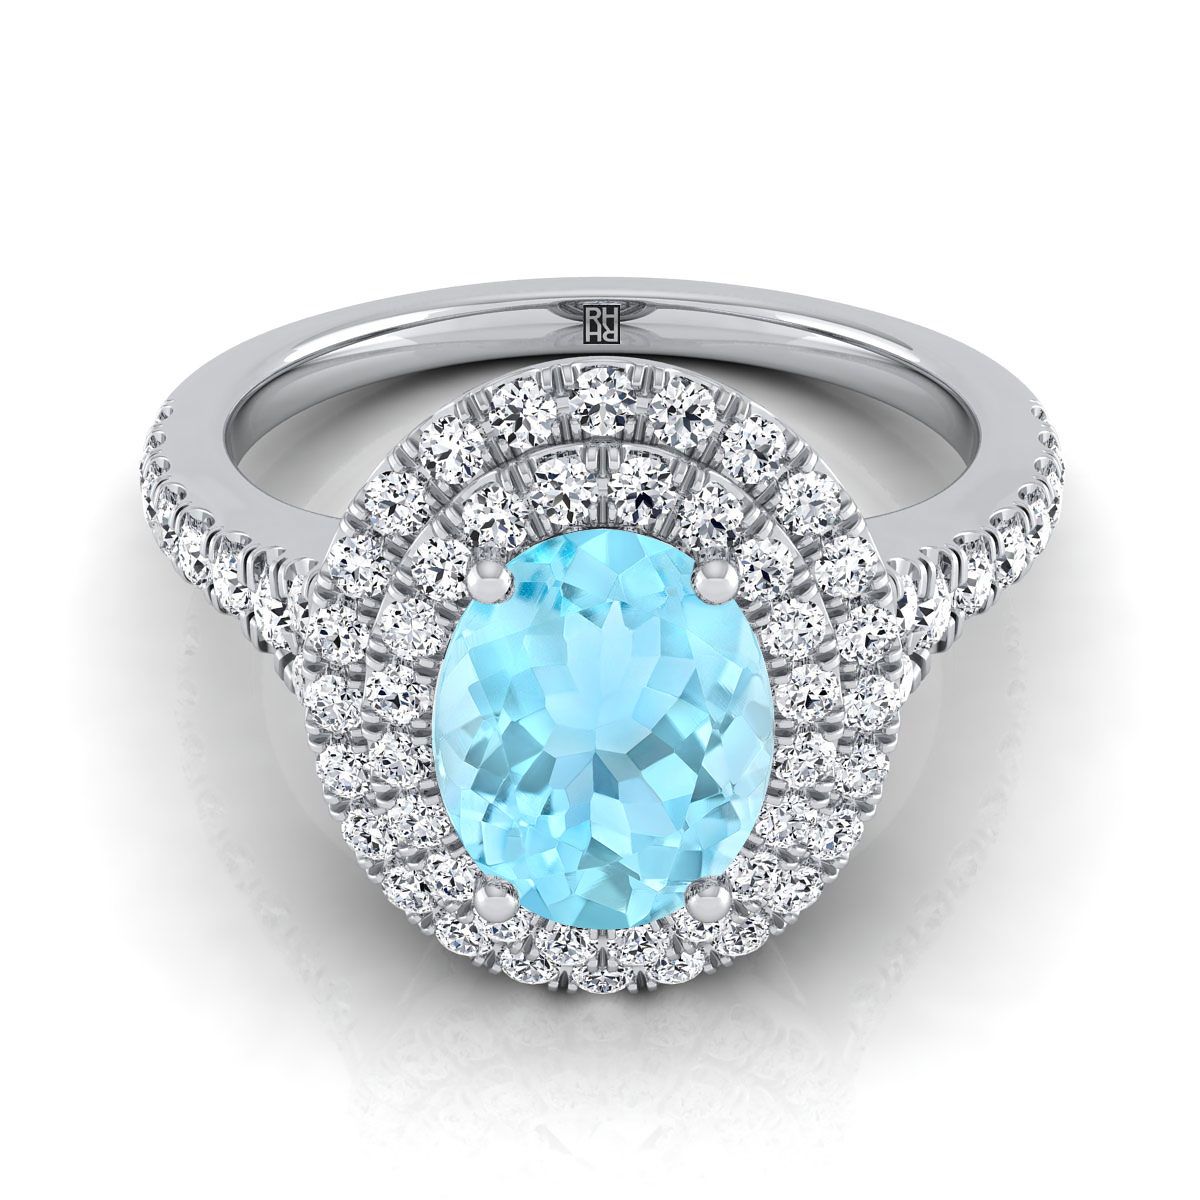 18K White Gold Oval Aquamarine Double Halo with Scalloped Pavé Diamond Engagement Ring -1/2ctw